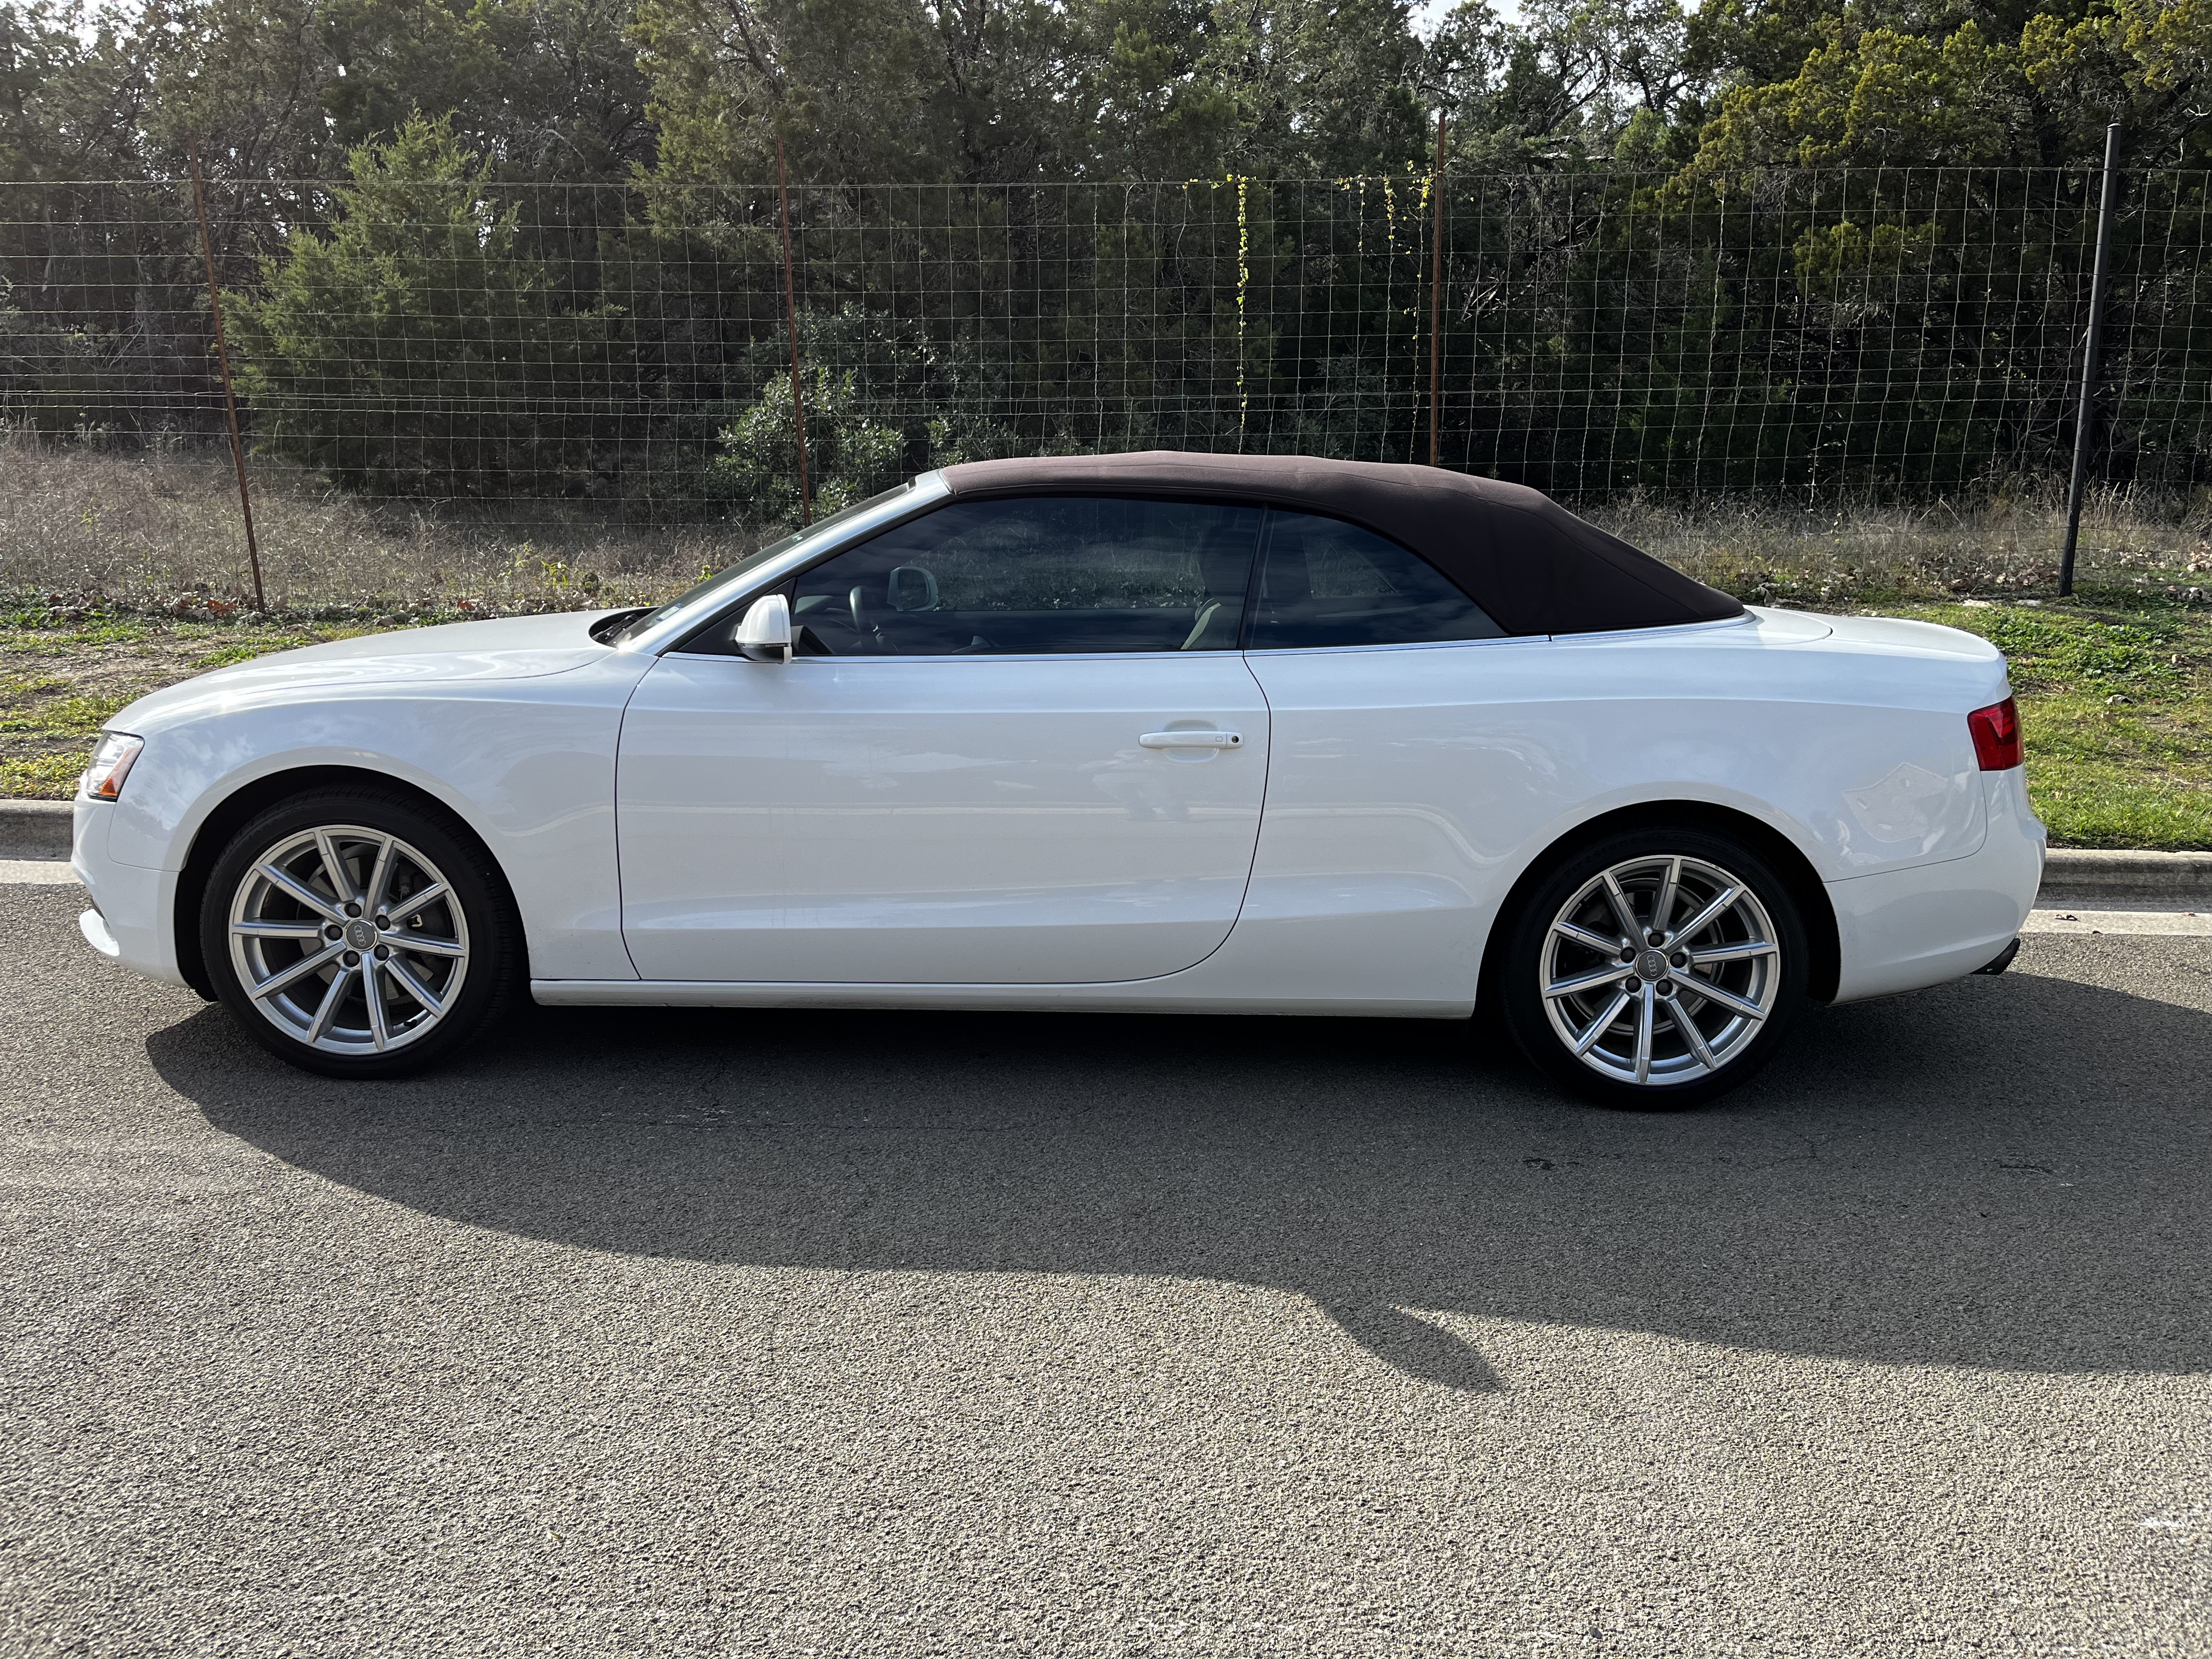 Used Audi A5 for Sale Right Now - Autotrader